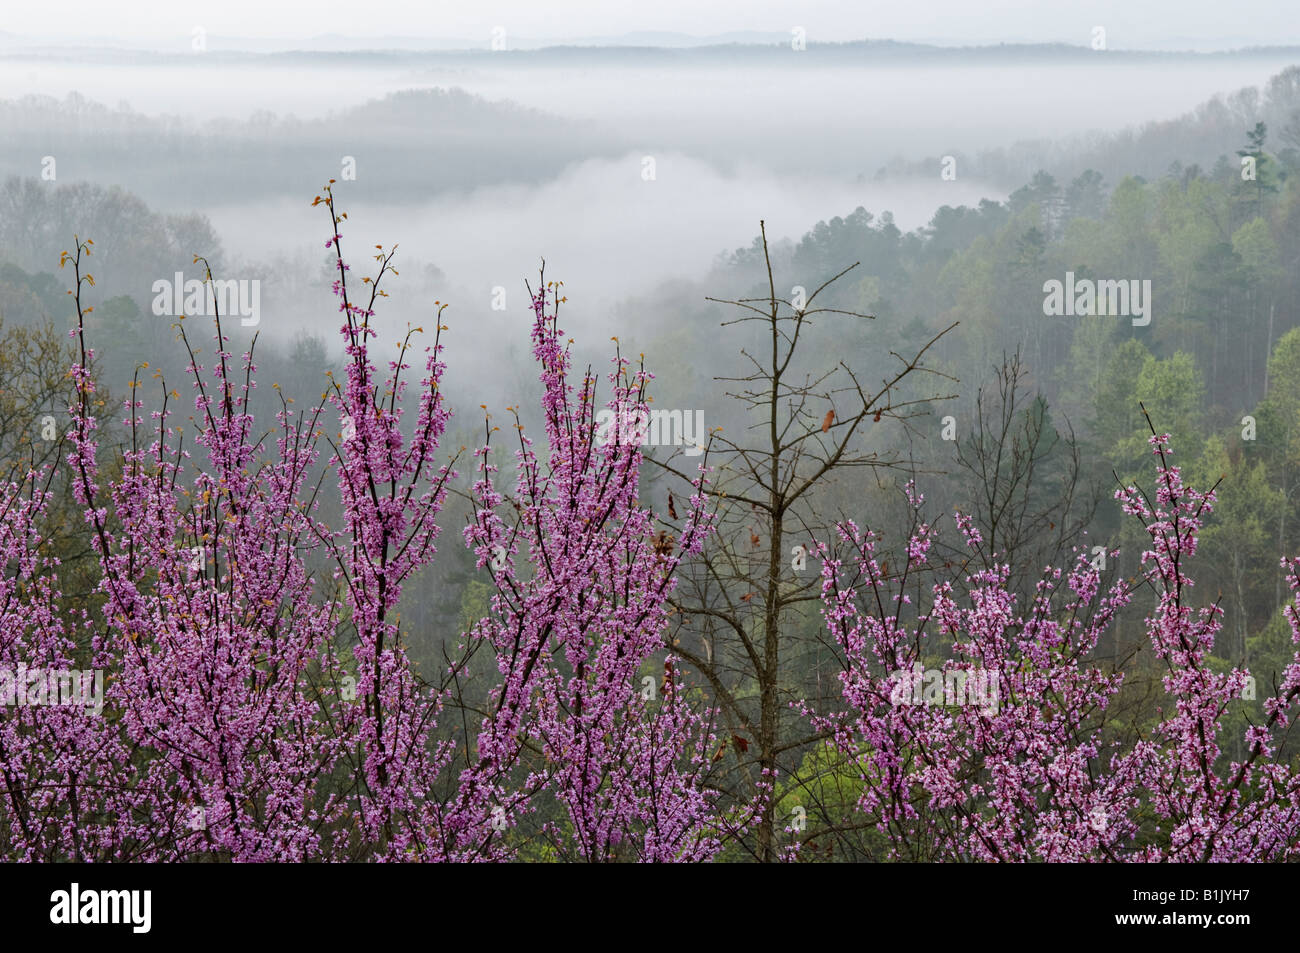 Eastern Redbud Blooming on Ridge Overlooking Misty Daniel Boone National Forest McCreary County Kentucky Stock Photo